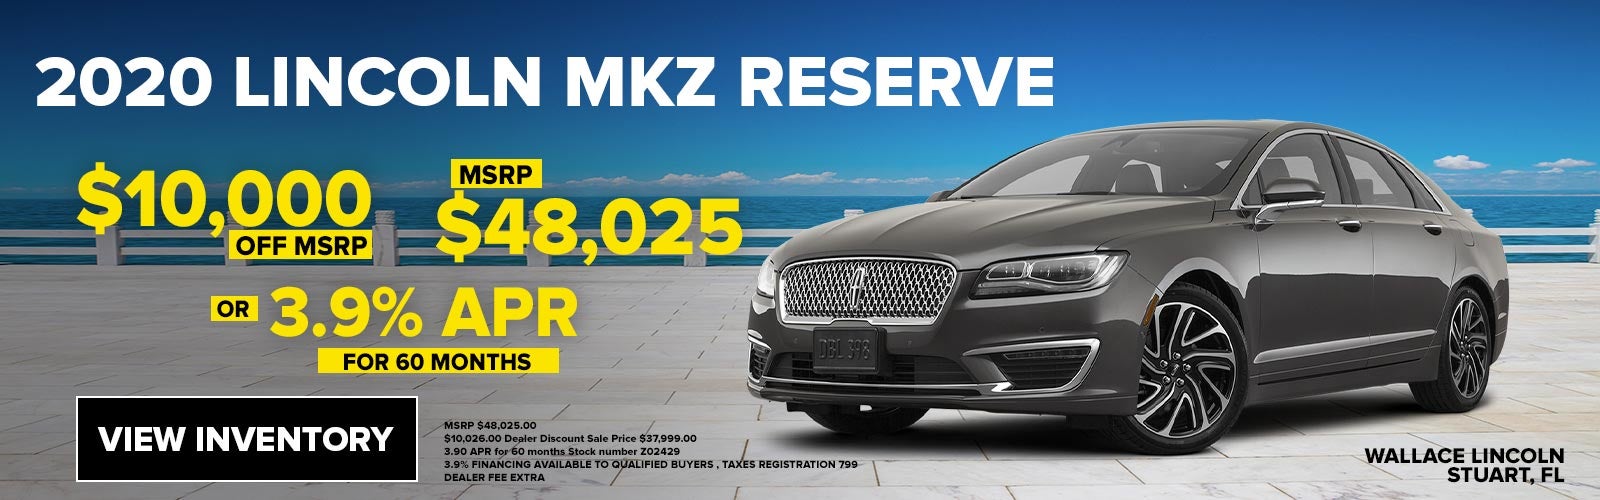 Lincoln MKZ Special Offer